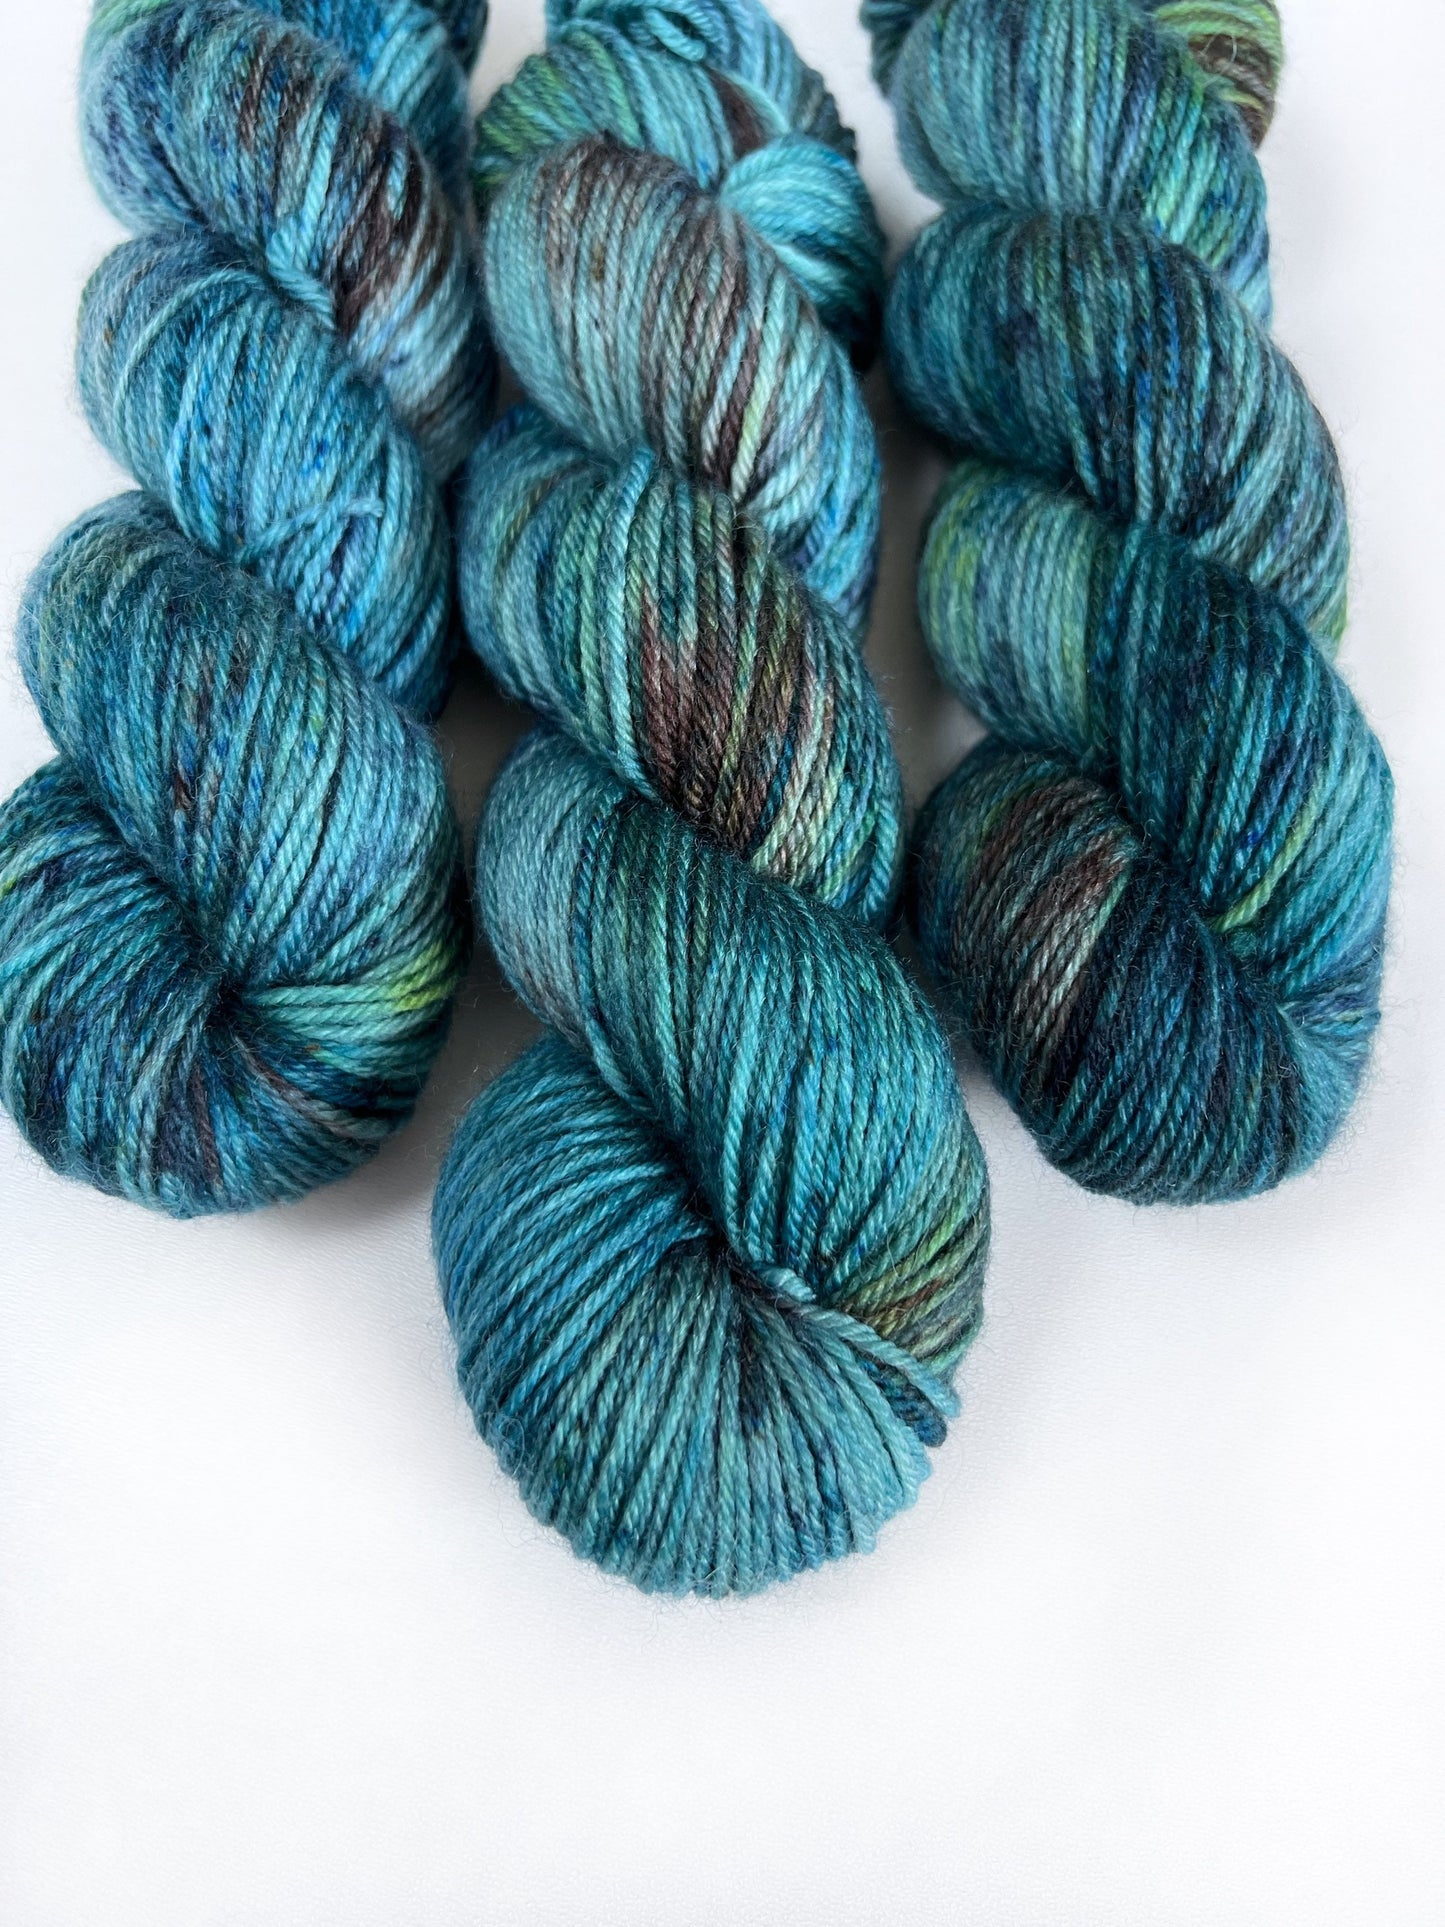 THE WORLD IS YOUR OYSTER - Teal Blue Green Grey Brown Variegated DK